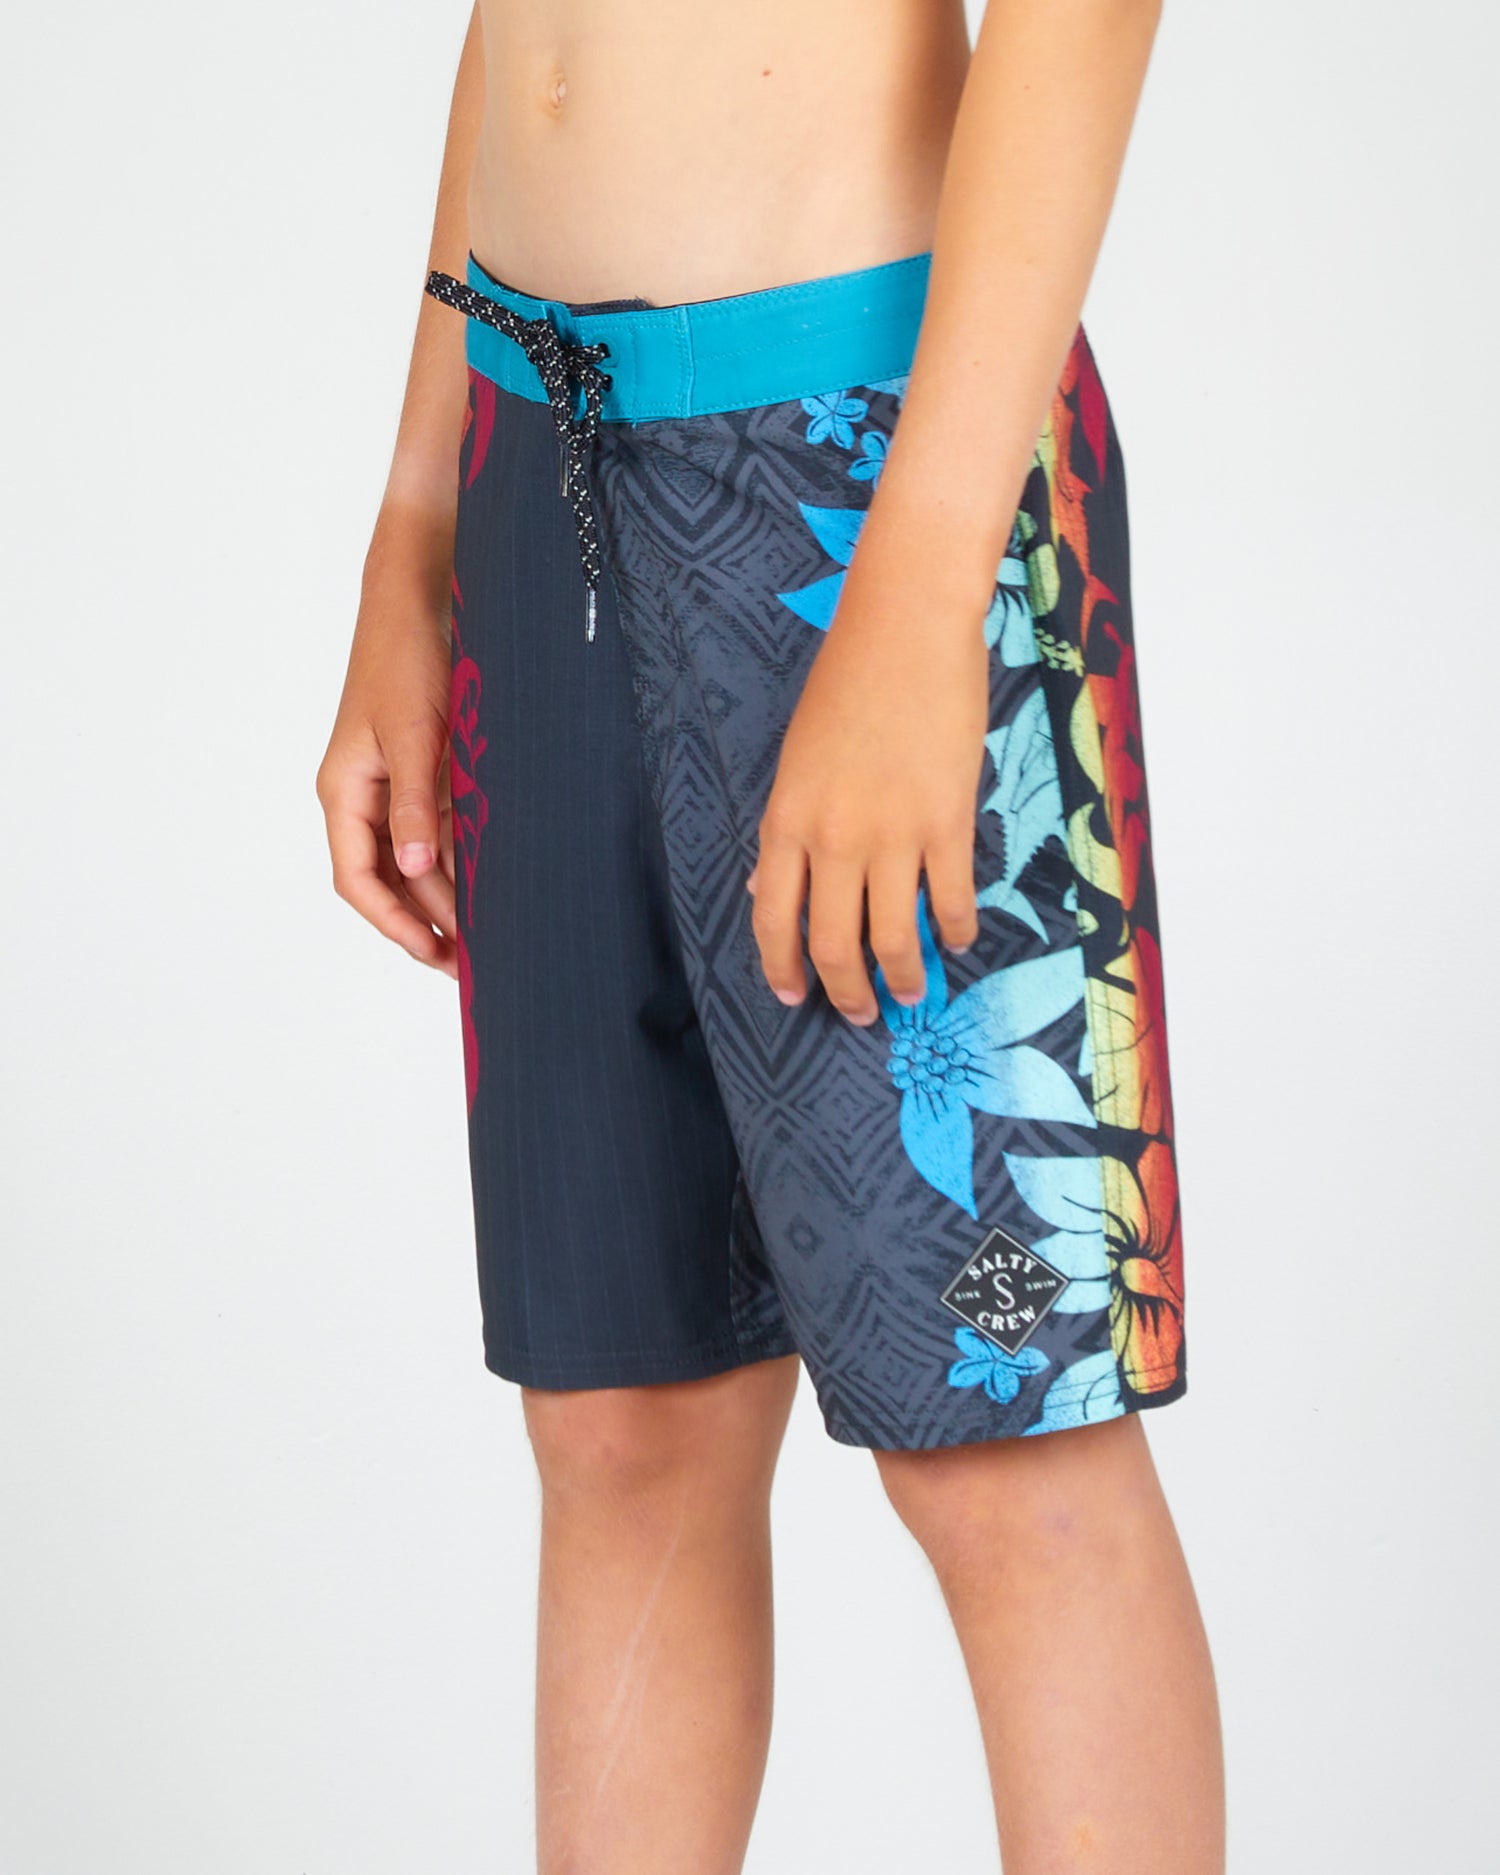 On body front angled view of the Cedros Boys Black/Aqua Boardshort